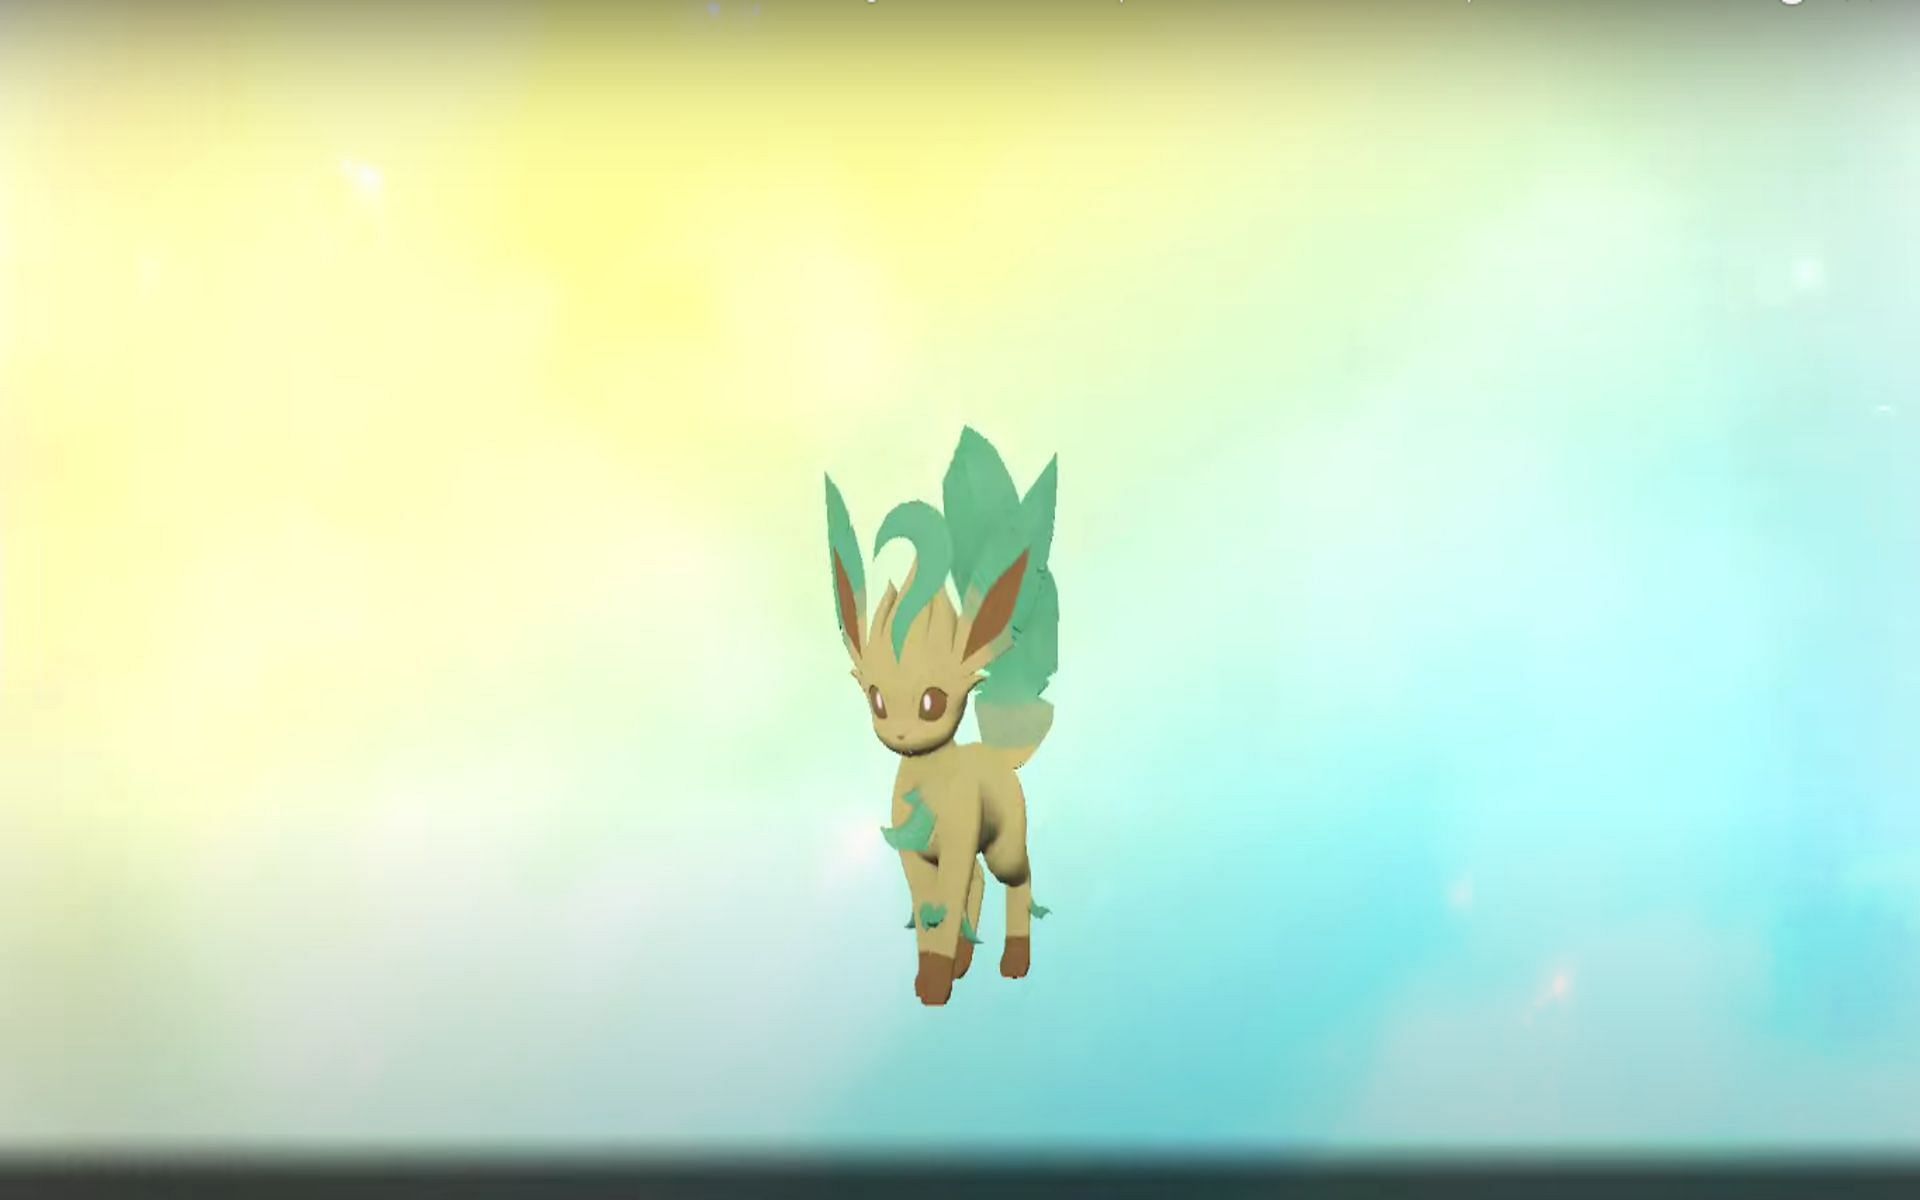 Trainers will need a Leaf Stone to evolve Eevee into Leafeon in Pokemon Legends: Arceus (Image via Game Freak)